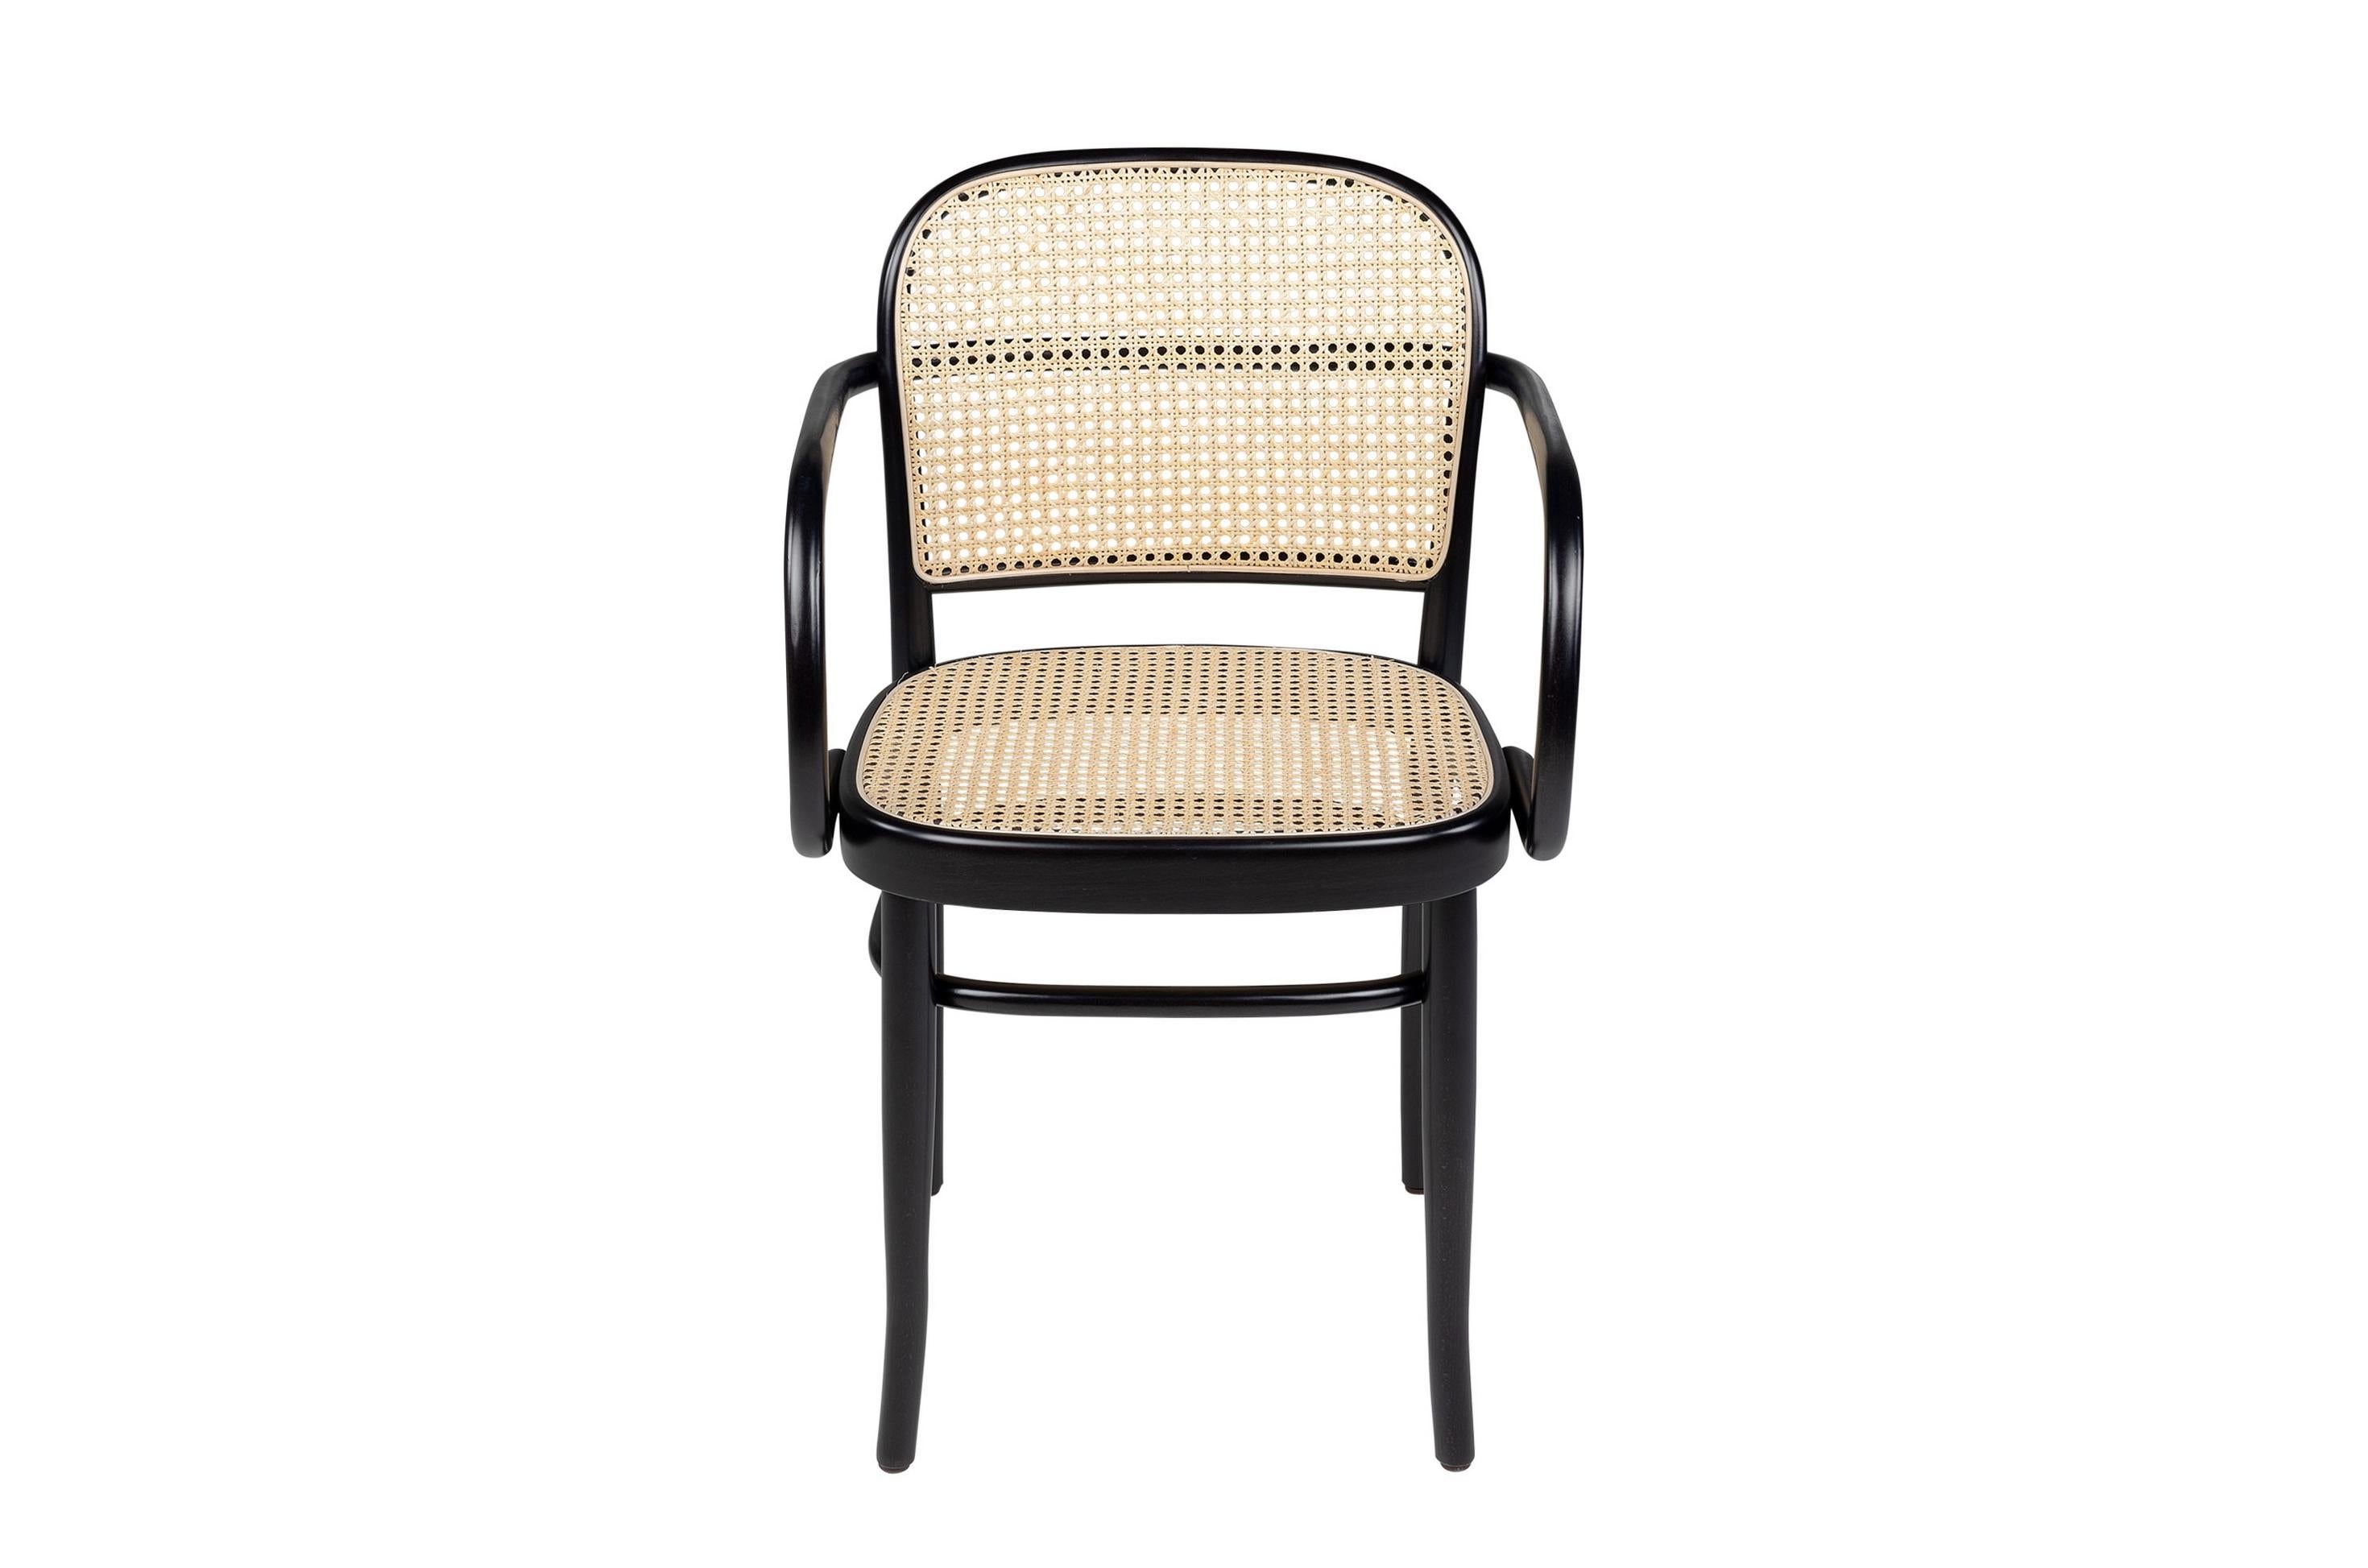 Black Lacquered Beech Wooden and Wicker Cane Armchair 1